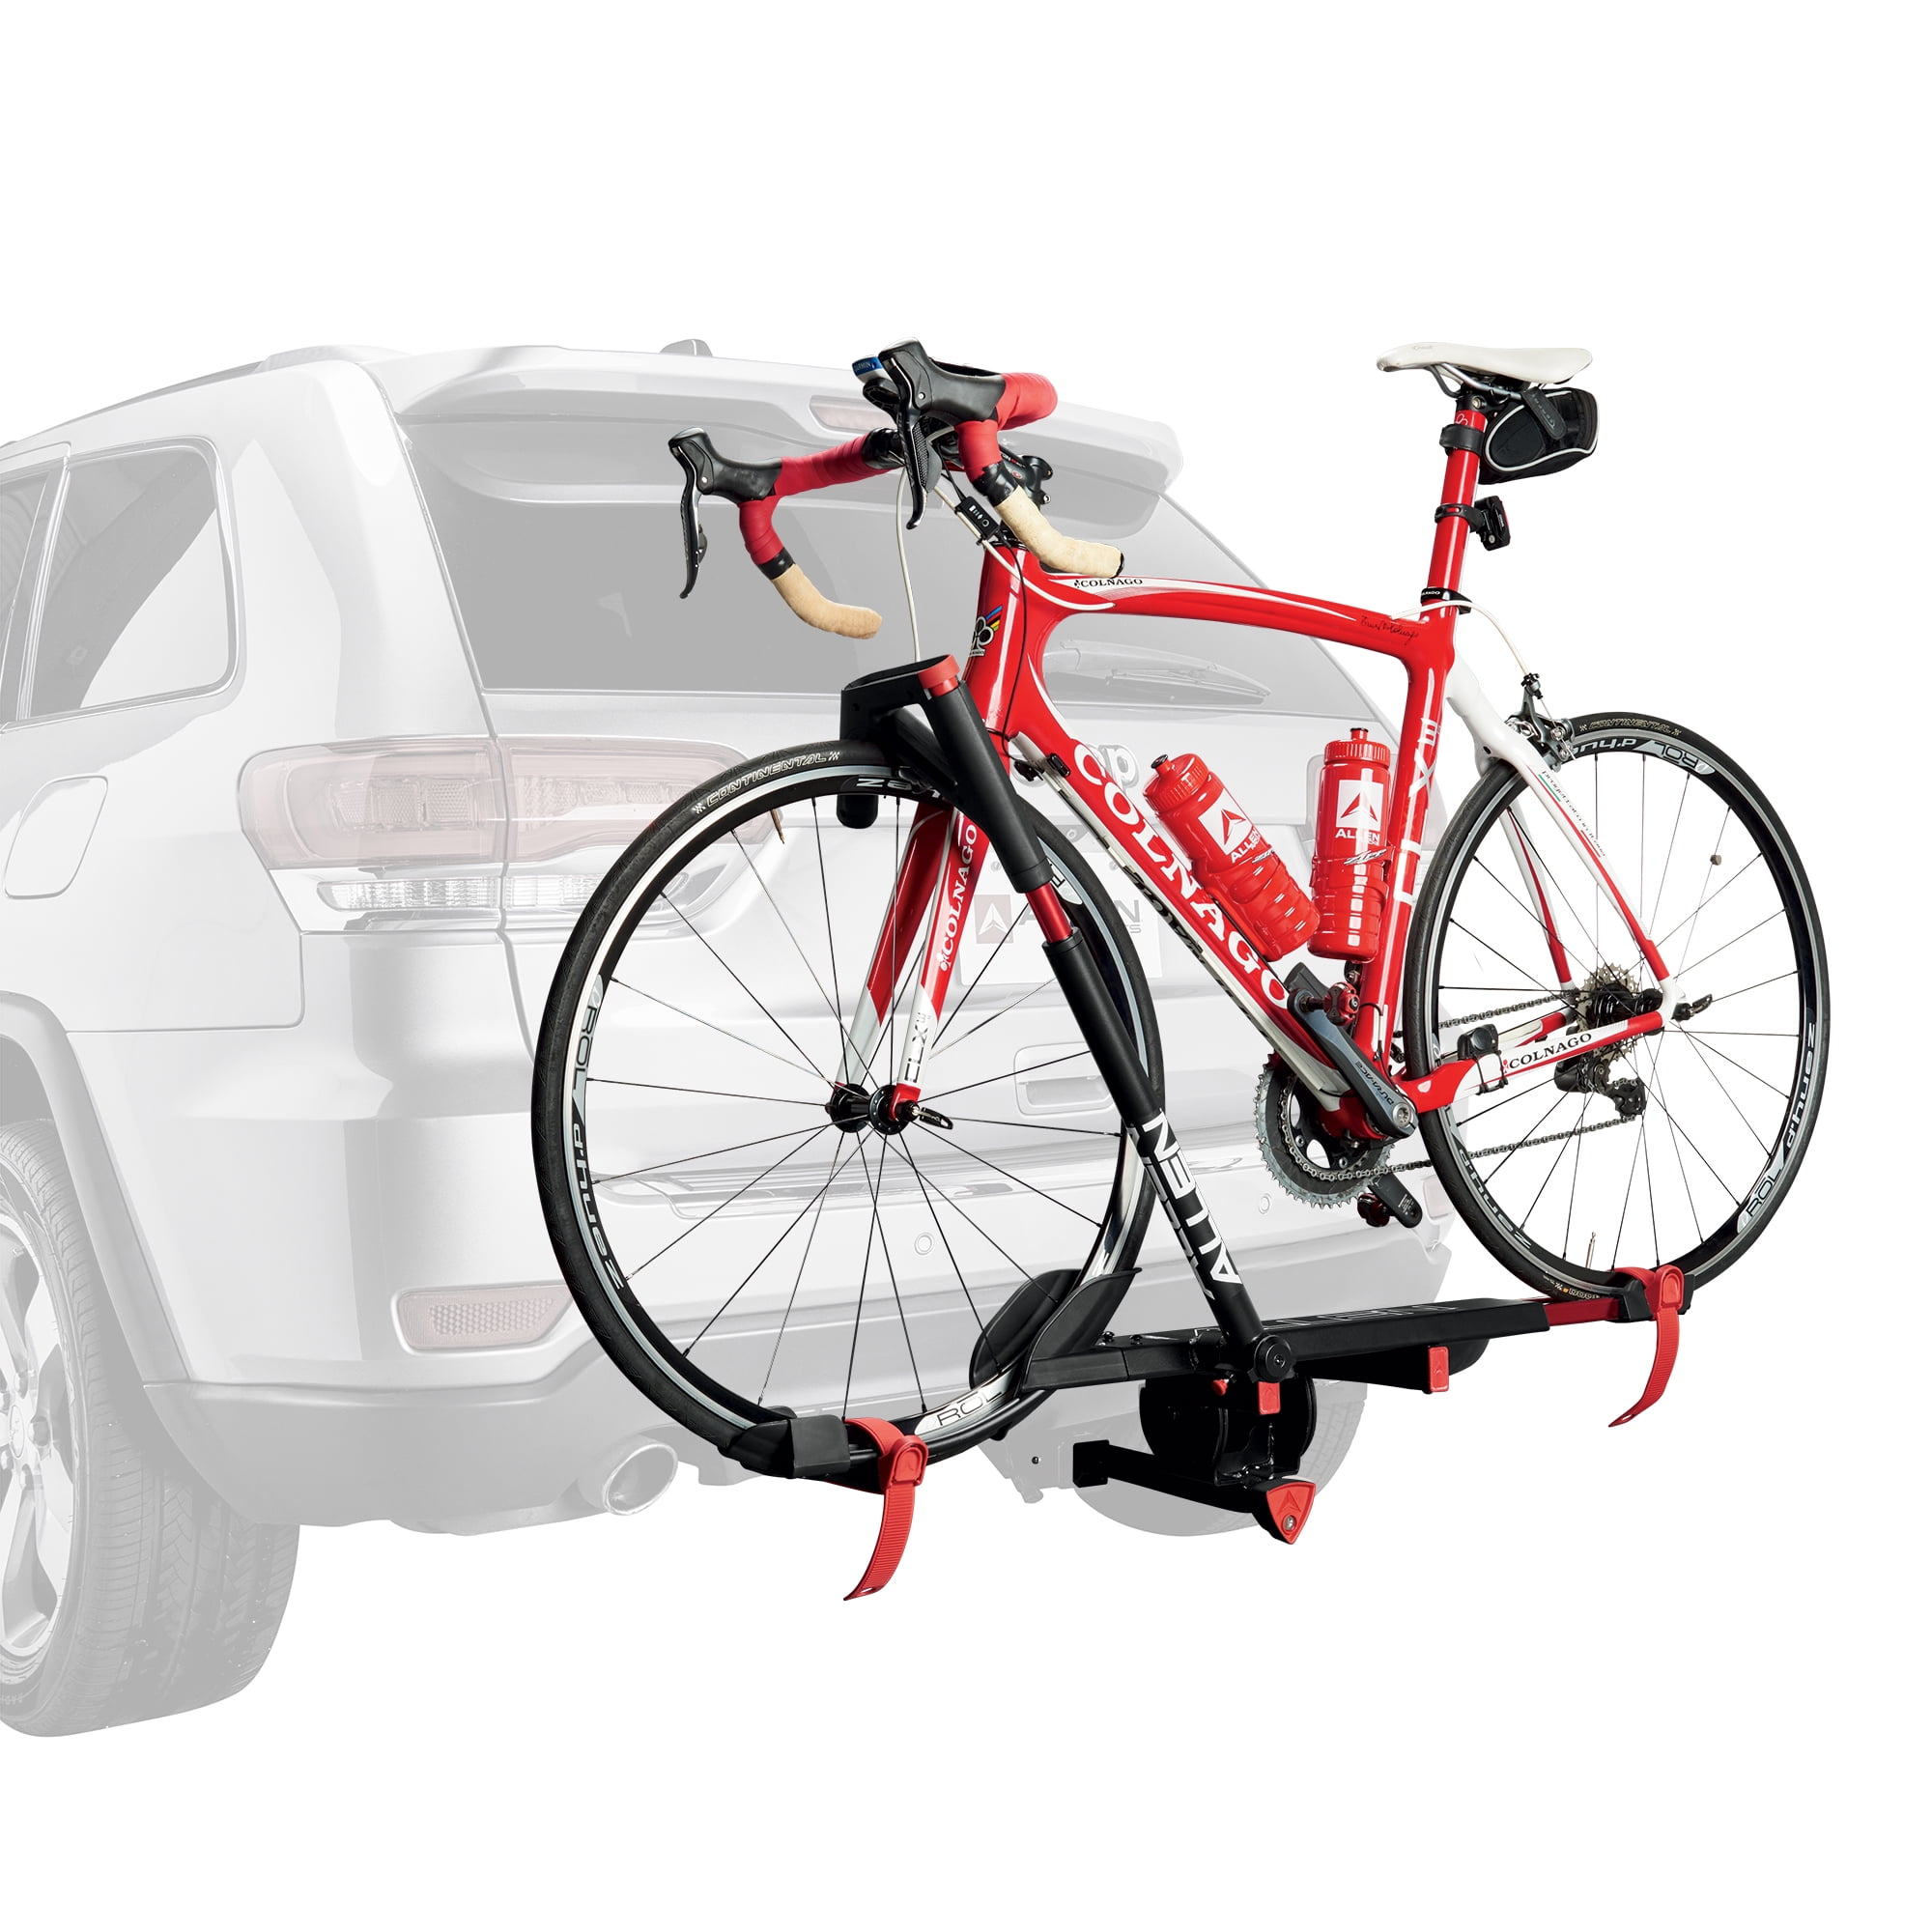 Big Fat Tire Bike Rack Mount Trailer Hitch Tray SUV Universal Carrier Tray Style 